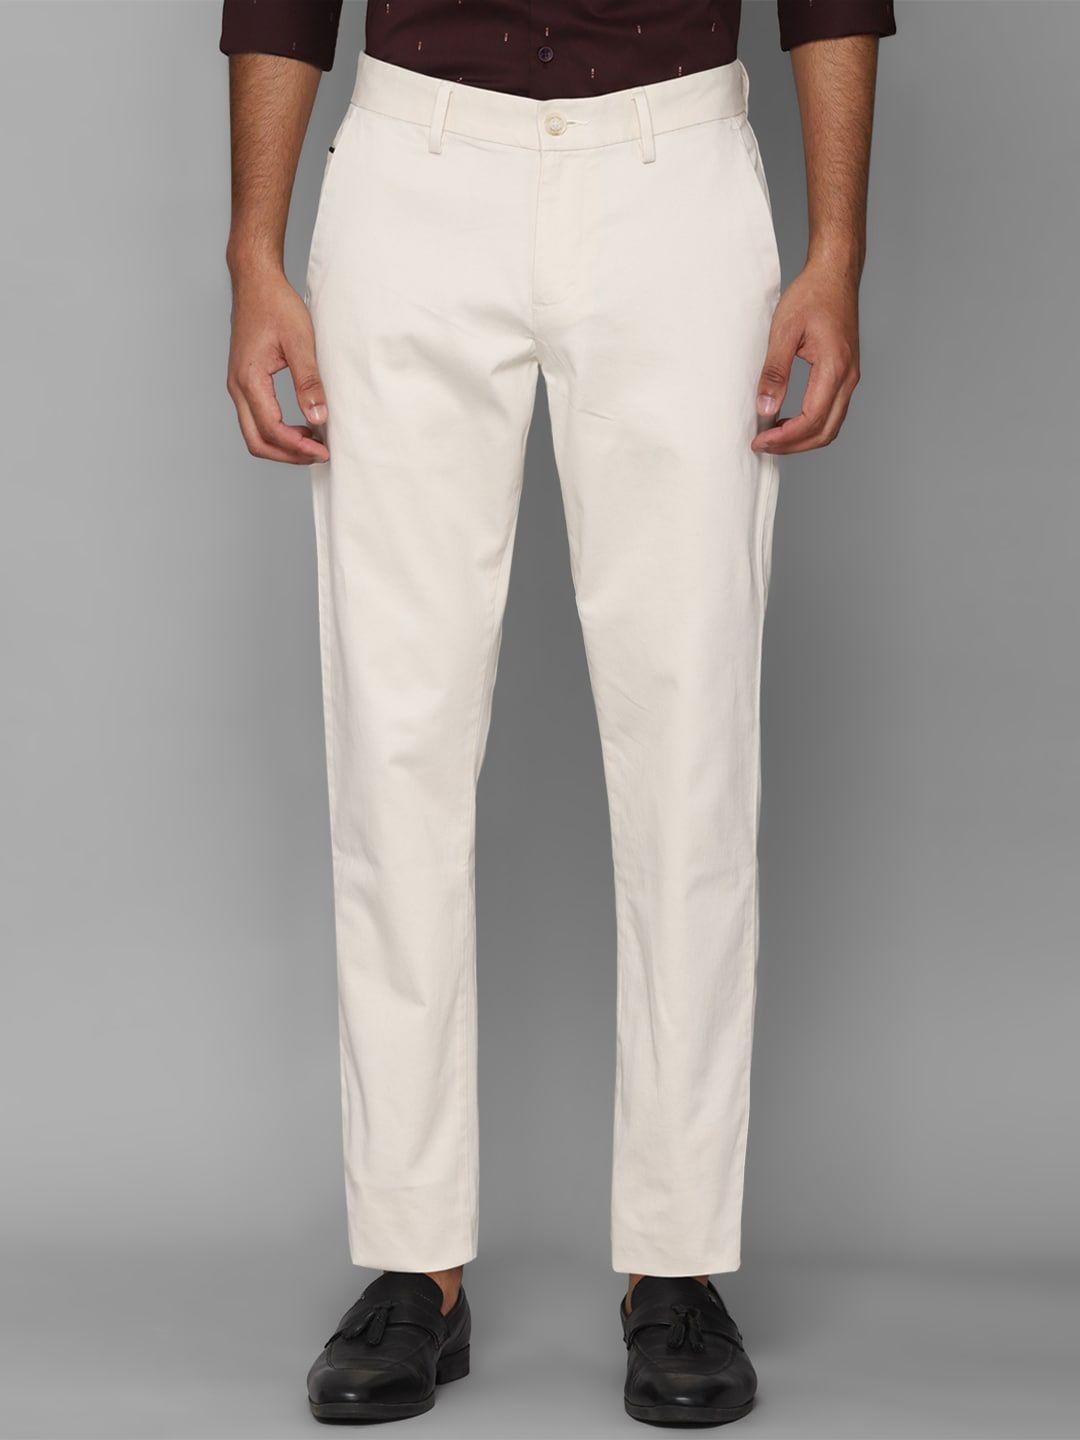 allen solly men off white solid slim fit trousers